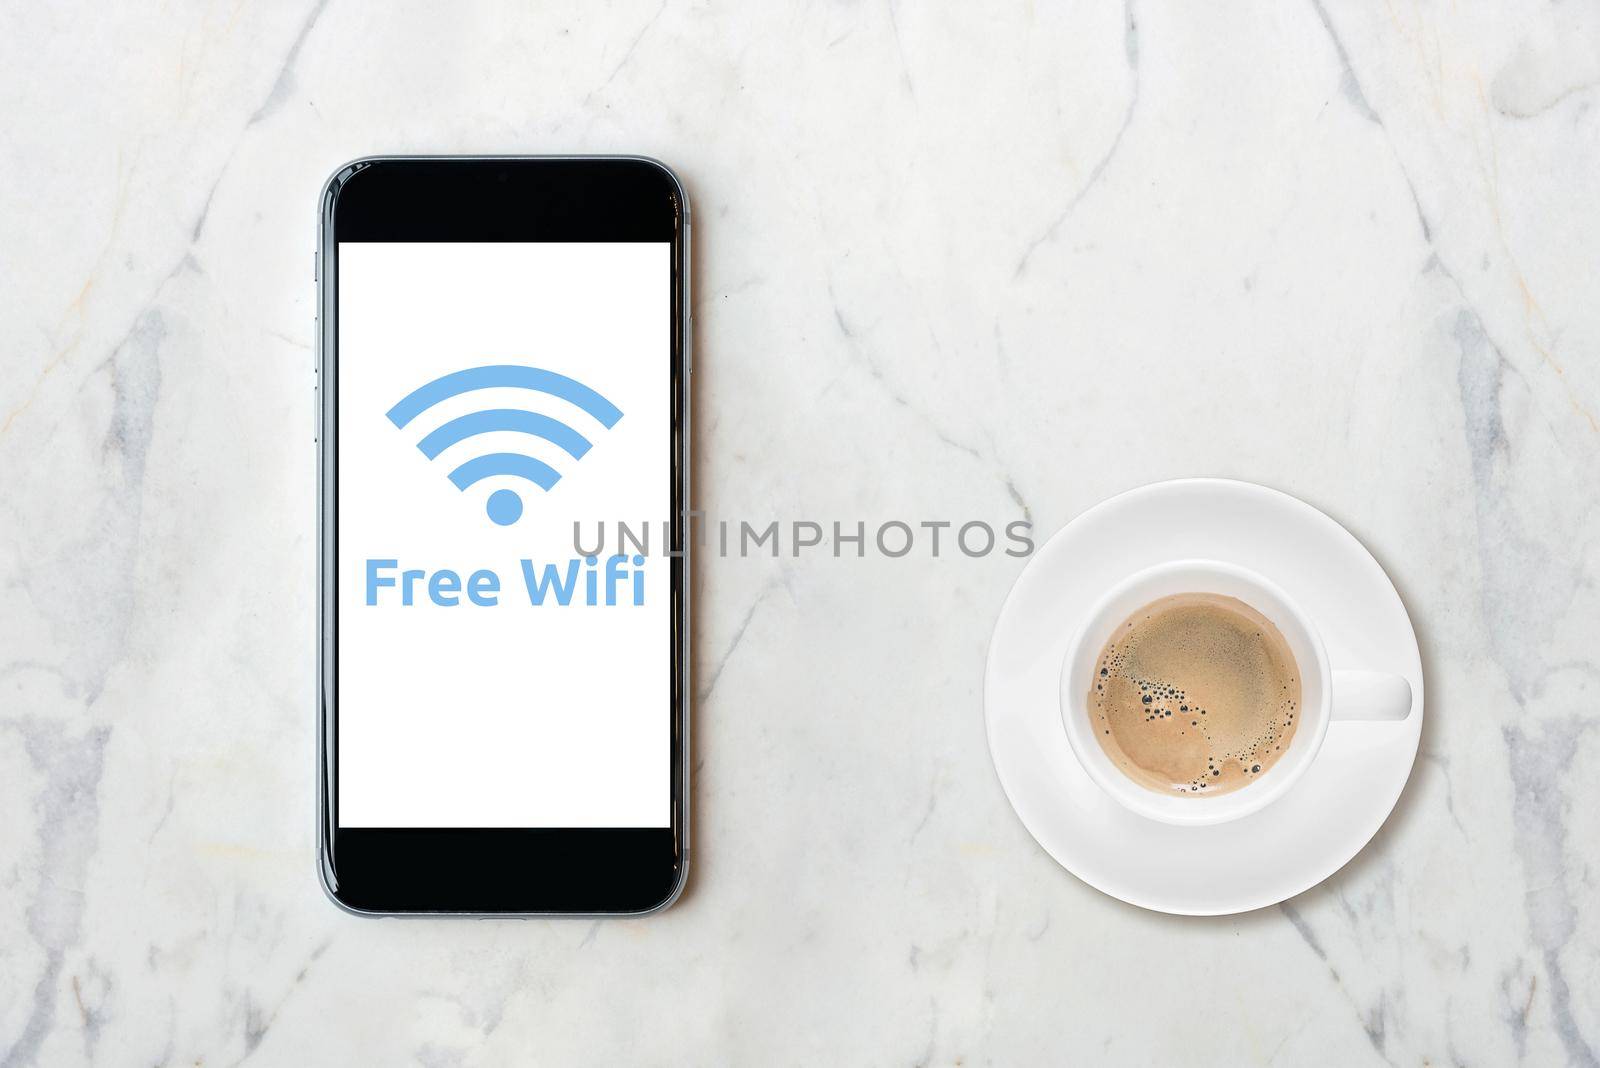 Smartphone with wifi network on screen and coffee cup on marble table.Elegant Design for smart business, business idea and internet of things technology concept 